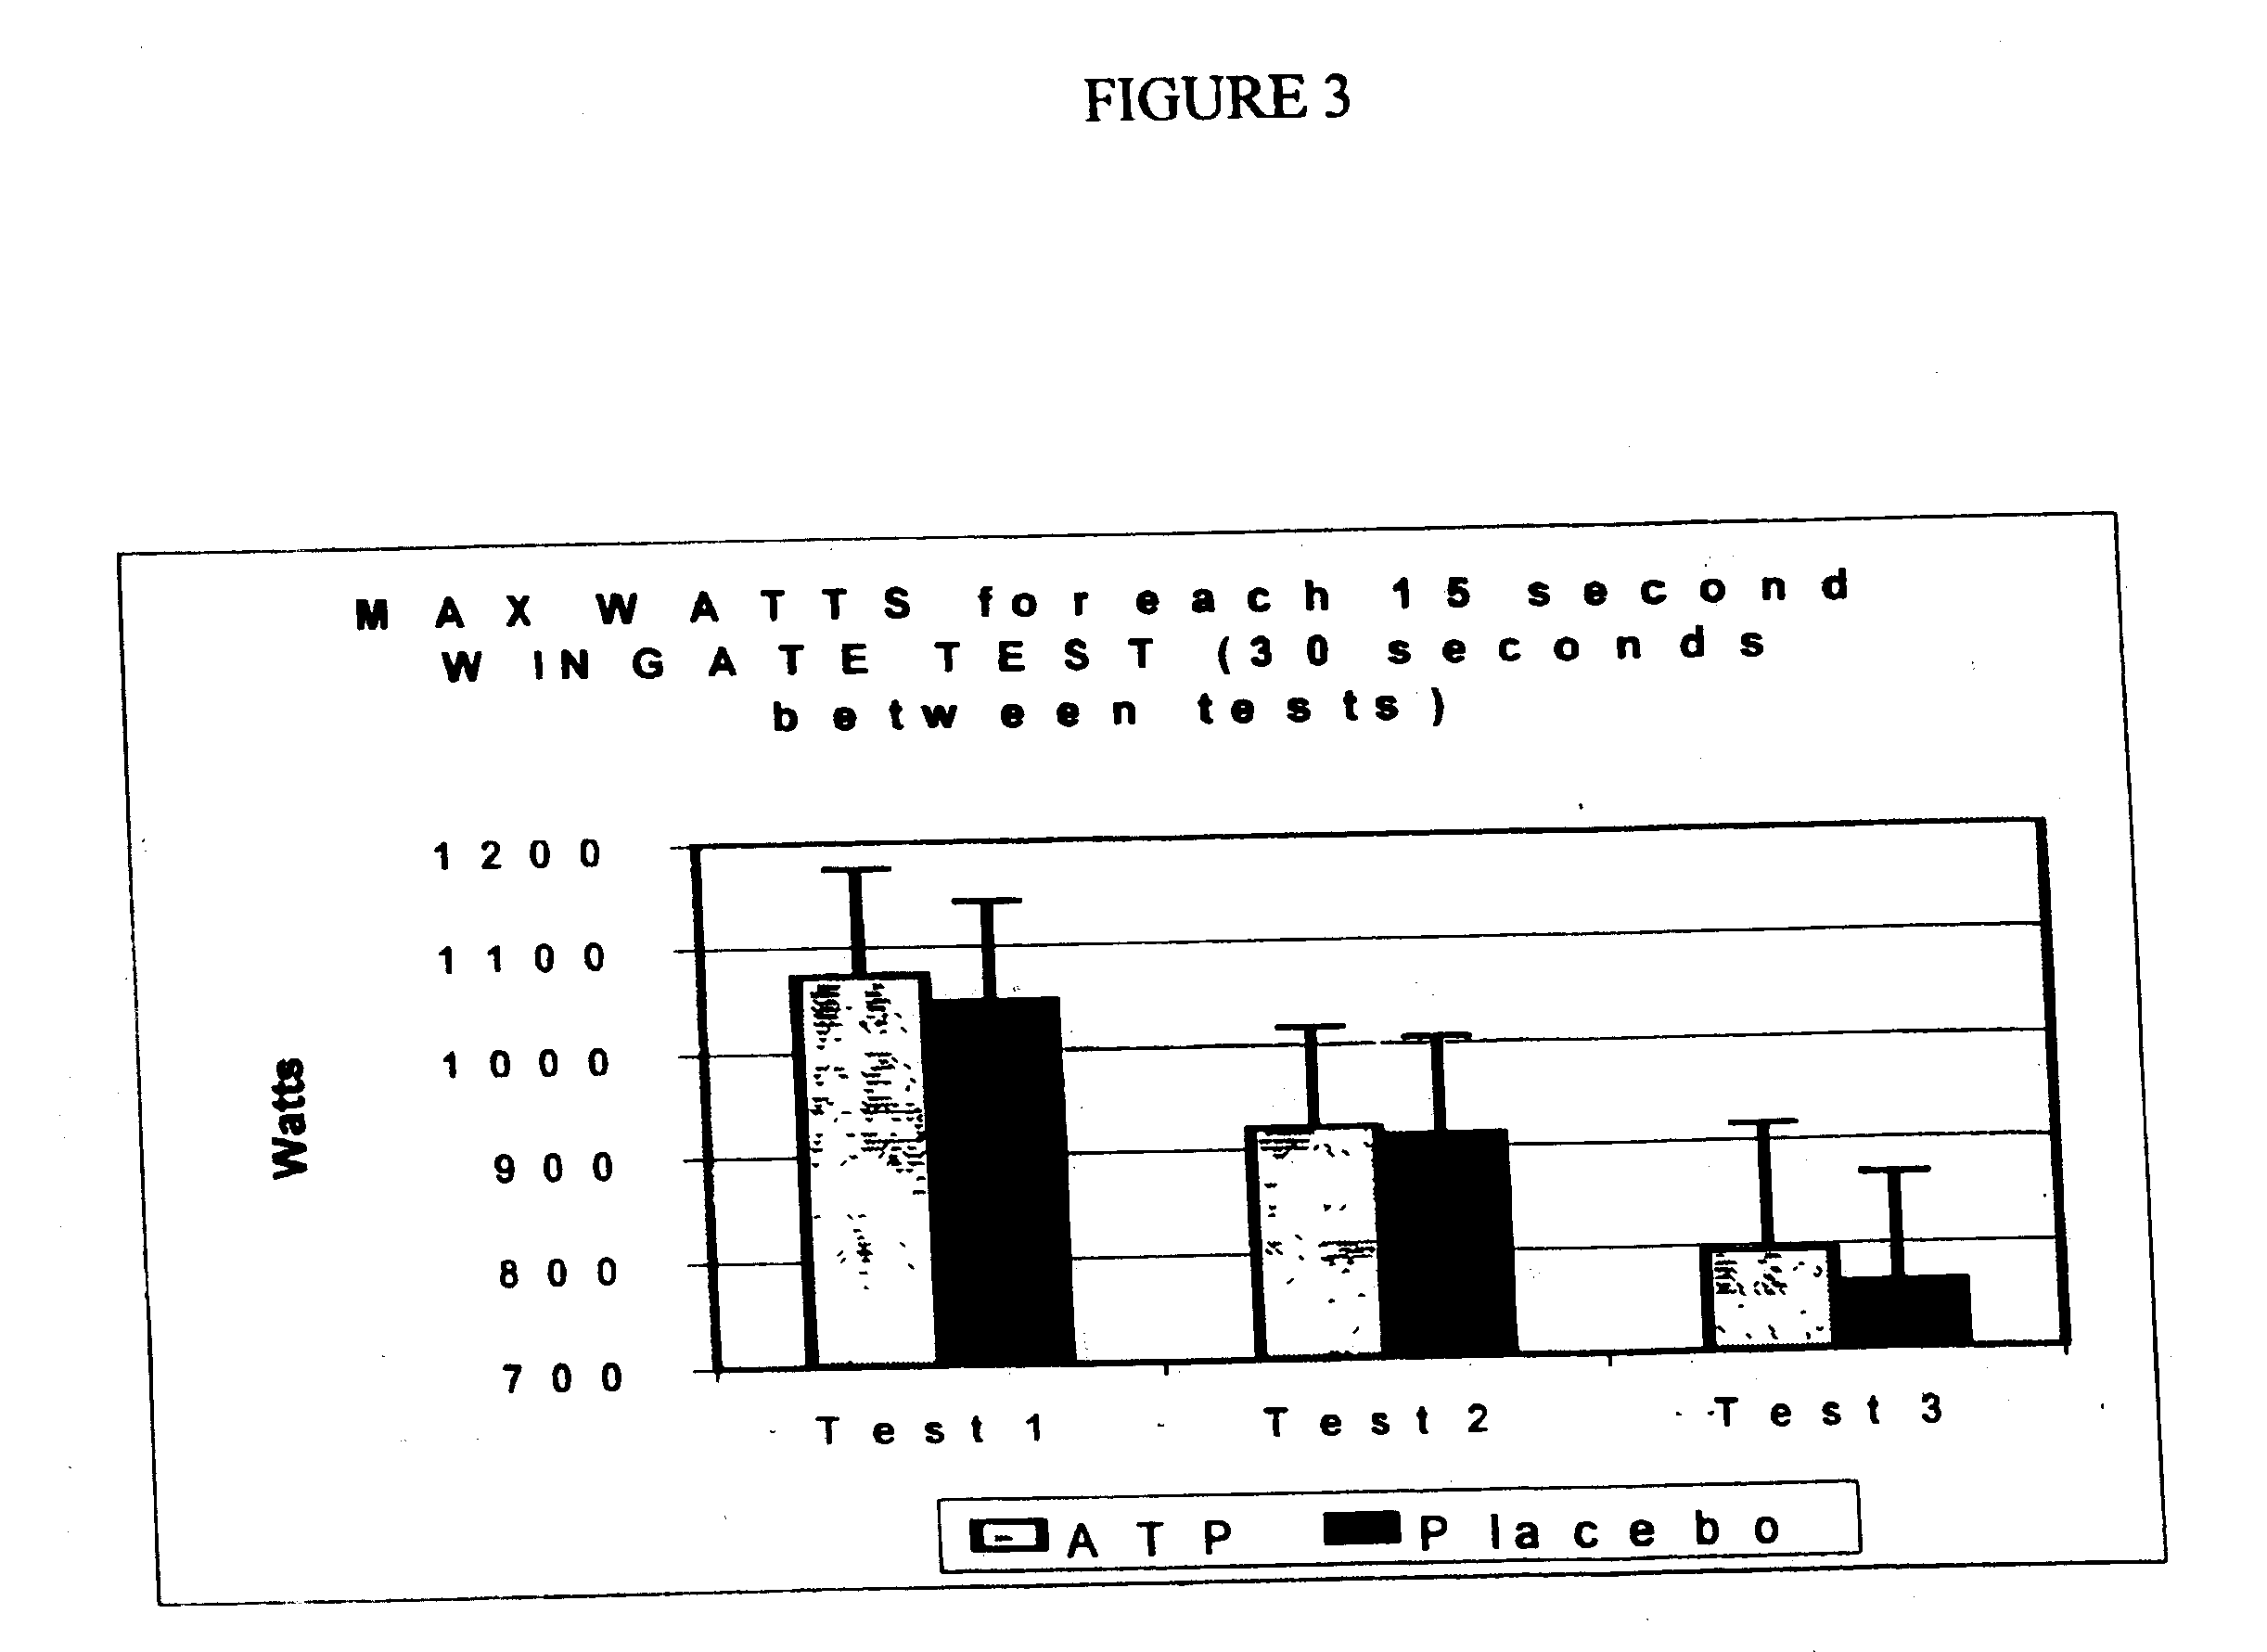 Method for increasing human performance by reducing muscle fatigue and recovery time through oral administration of adenosine triphosphate